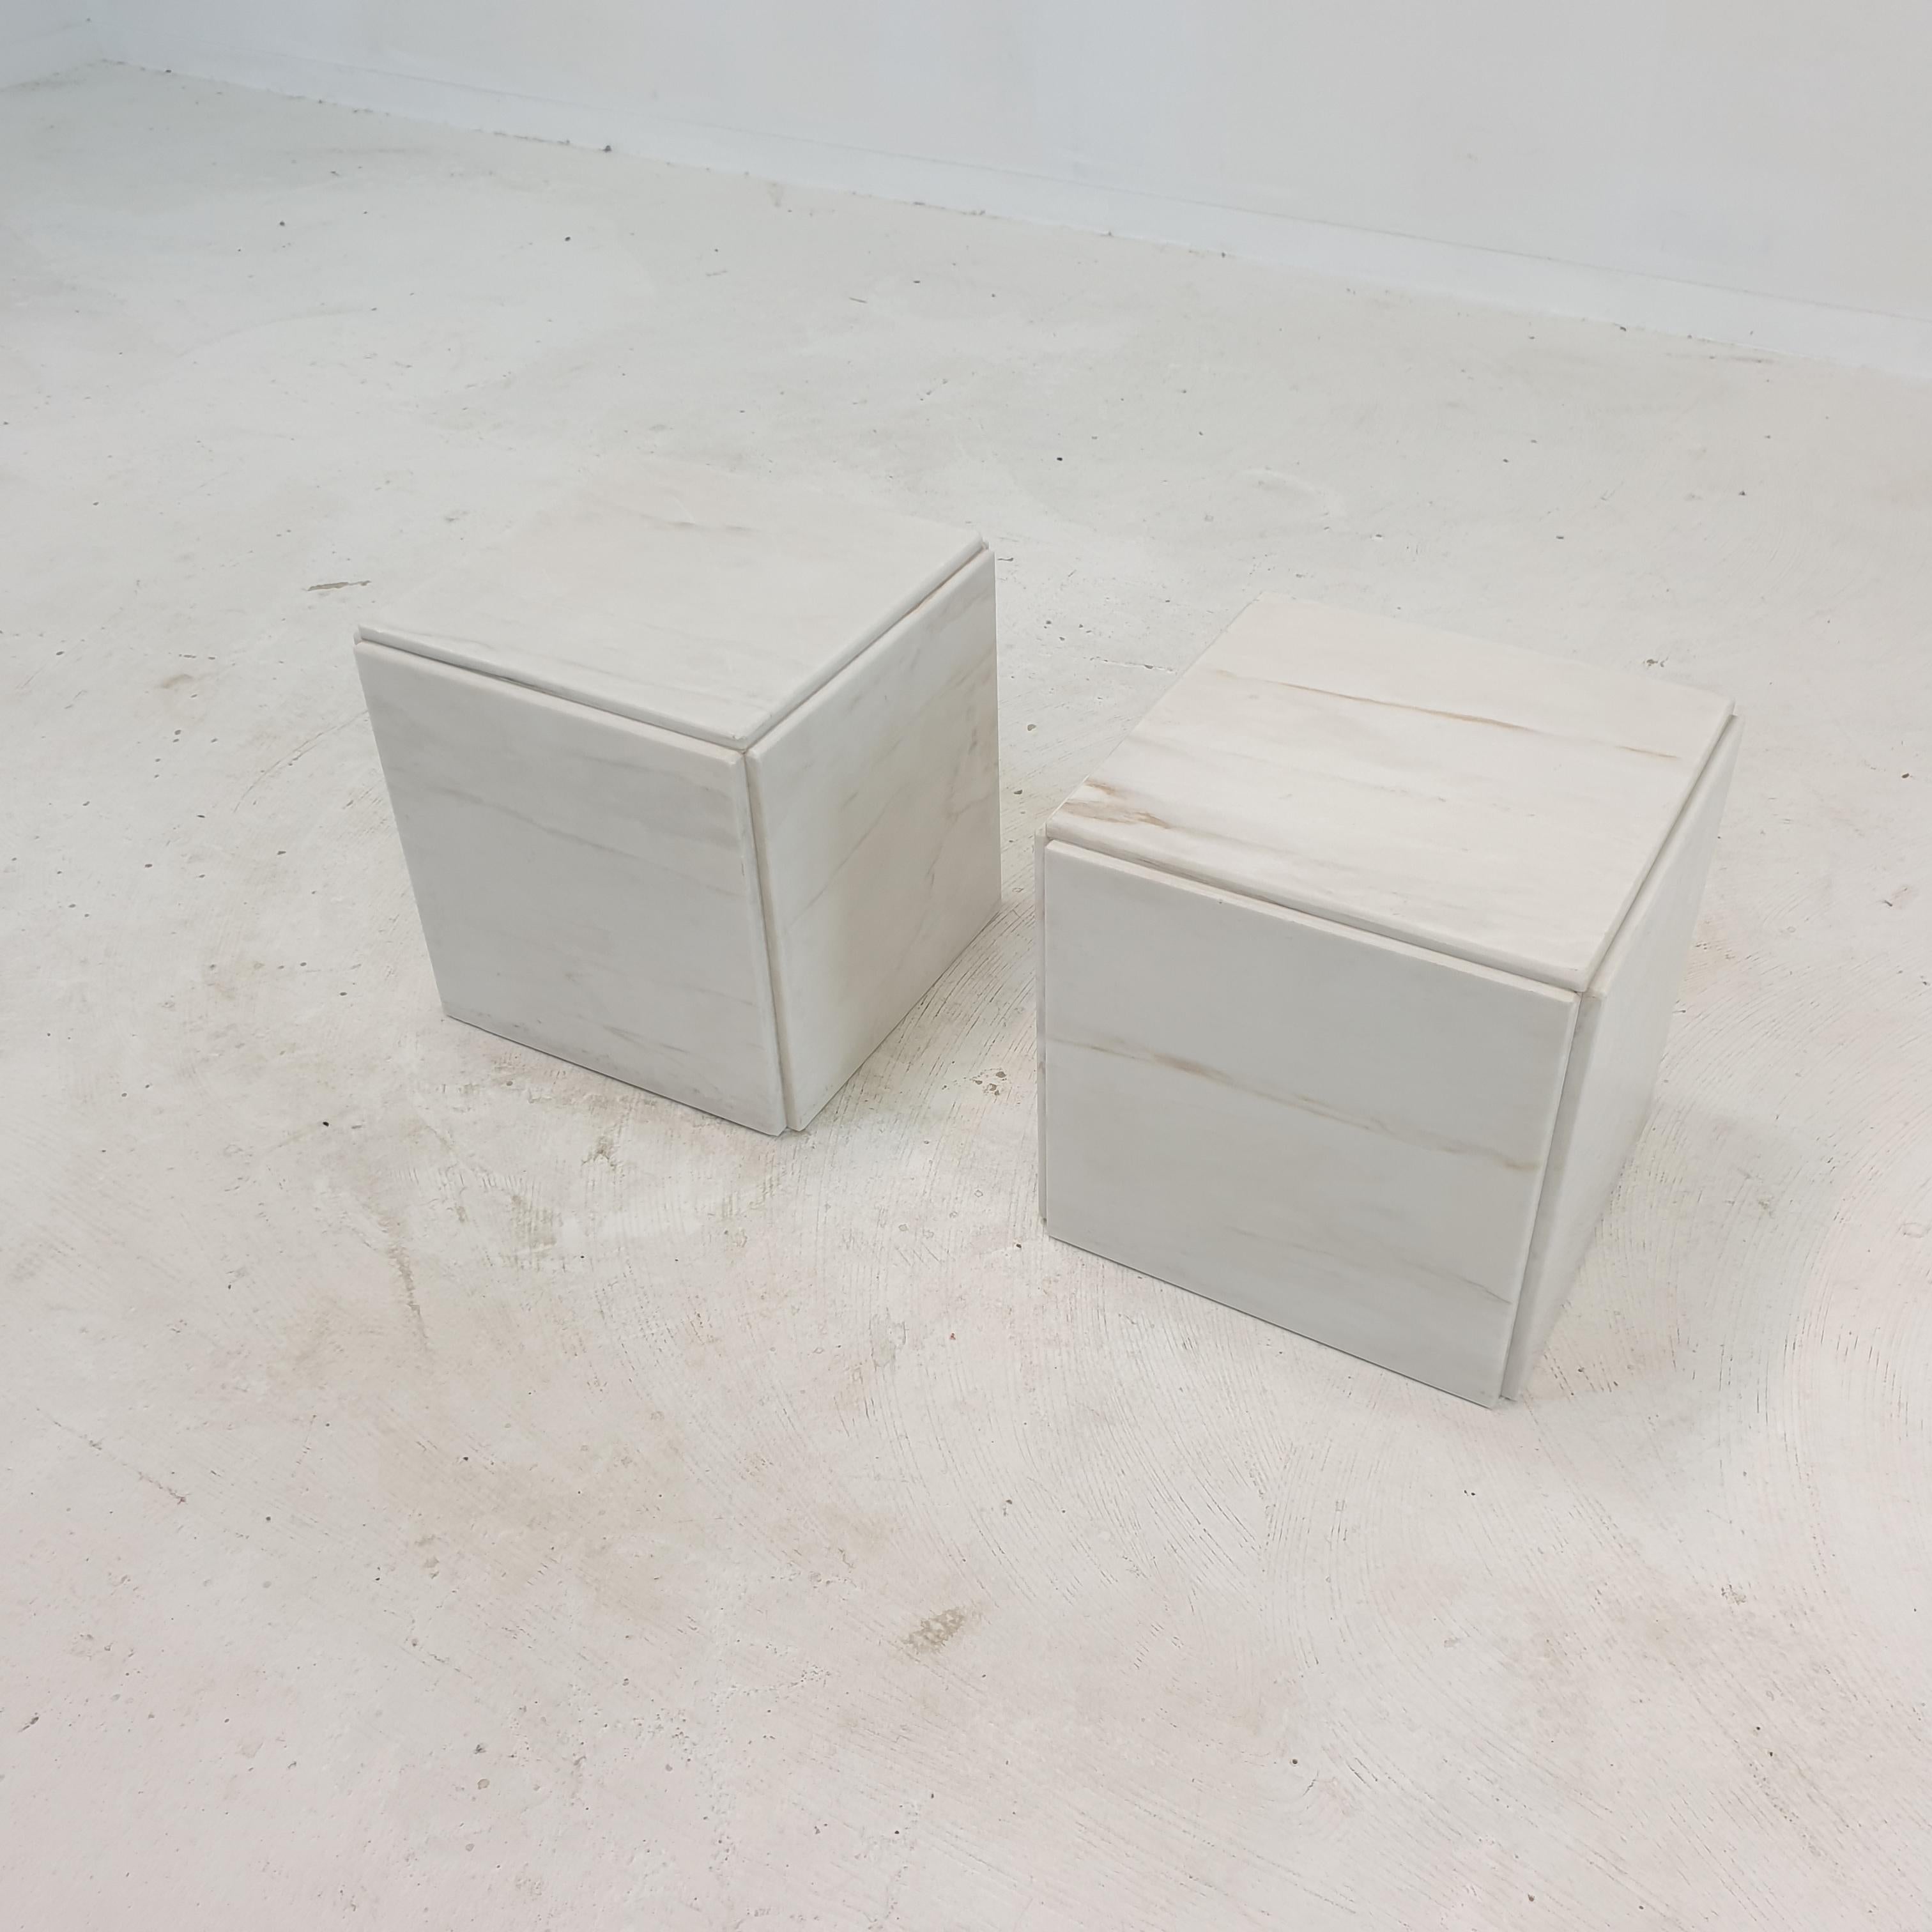 Late 20th Century Set of 2 Italian Marble Pedestals or Side Tables, 1980's For Sale